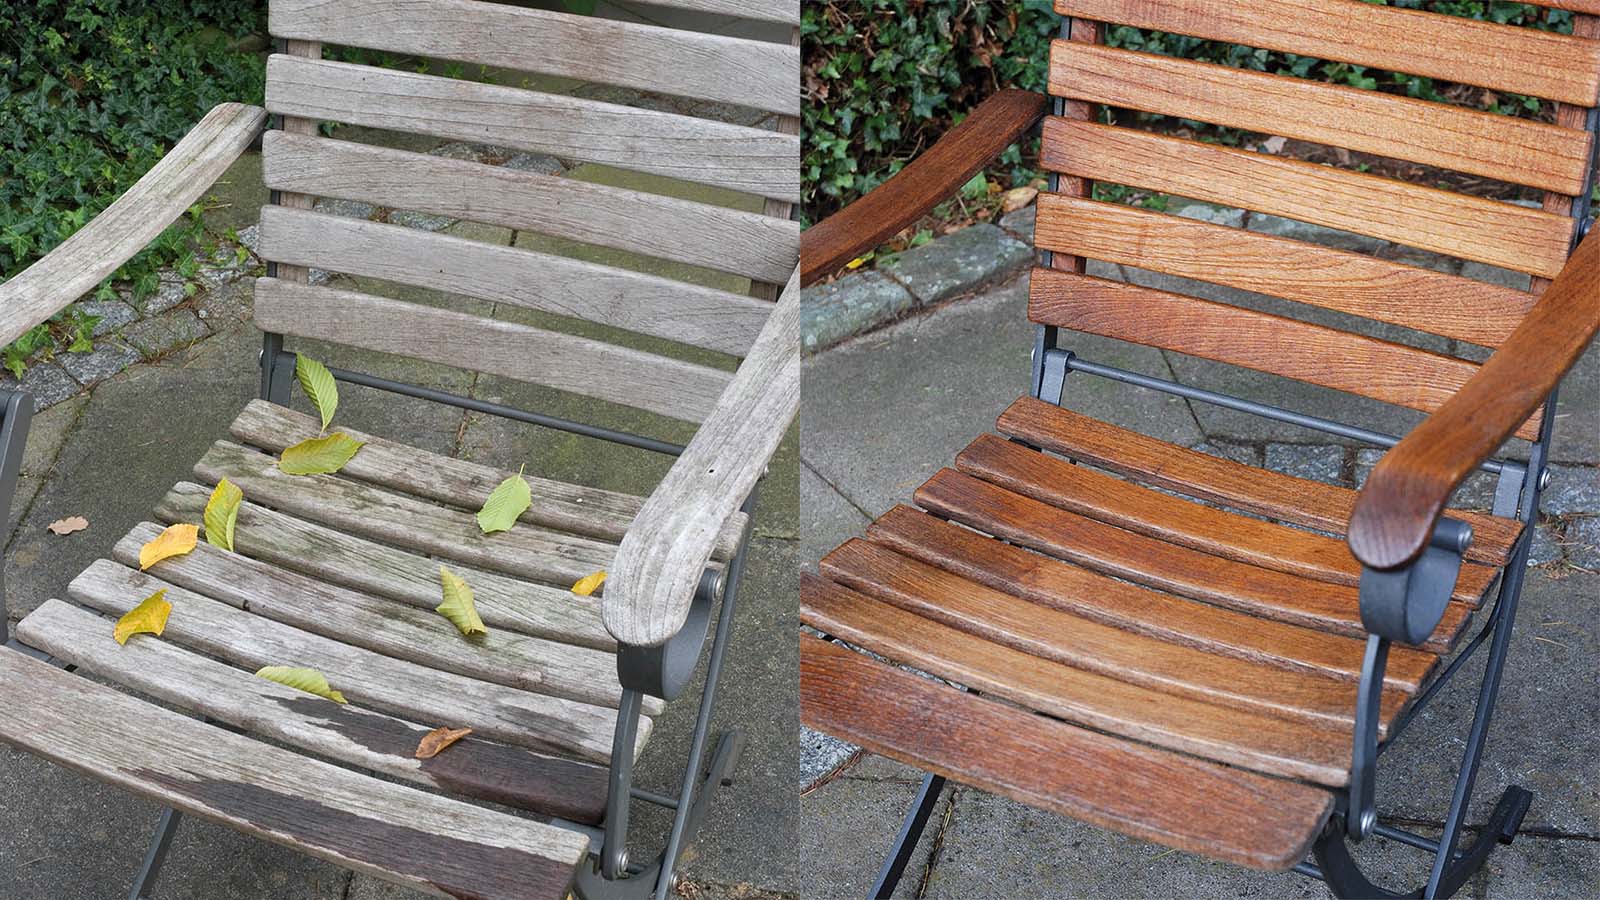 Renovate Wooden Garden Furniture With, What Oil To Use On Outdoor Wood Furniture